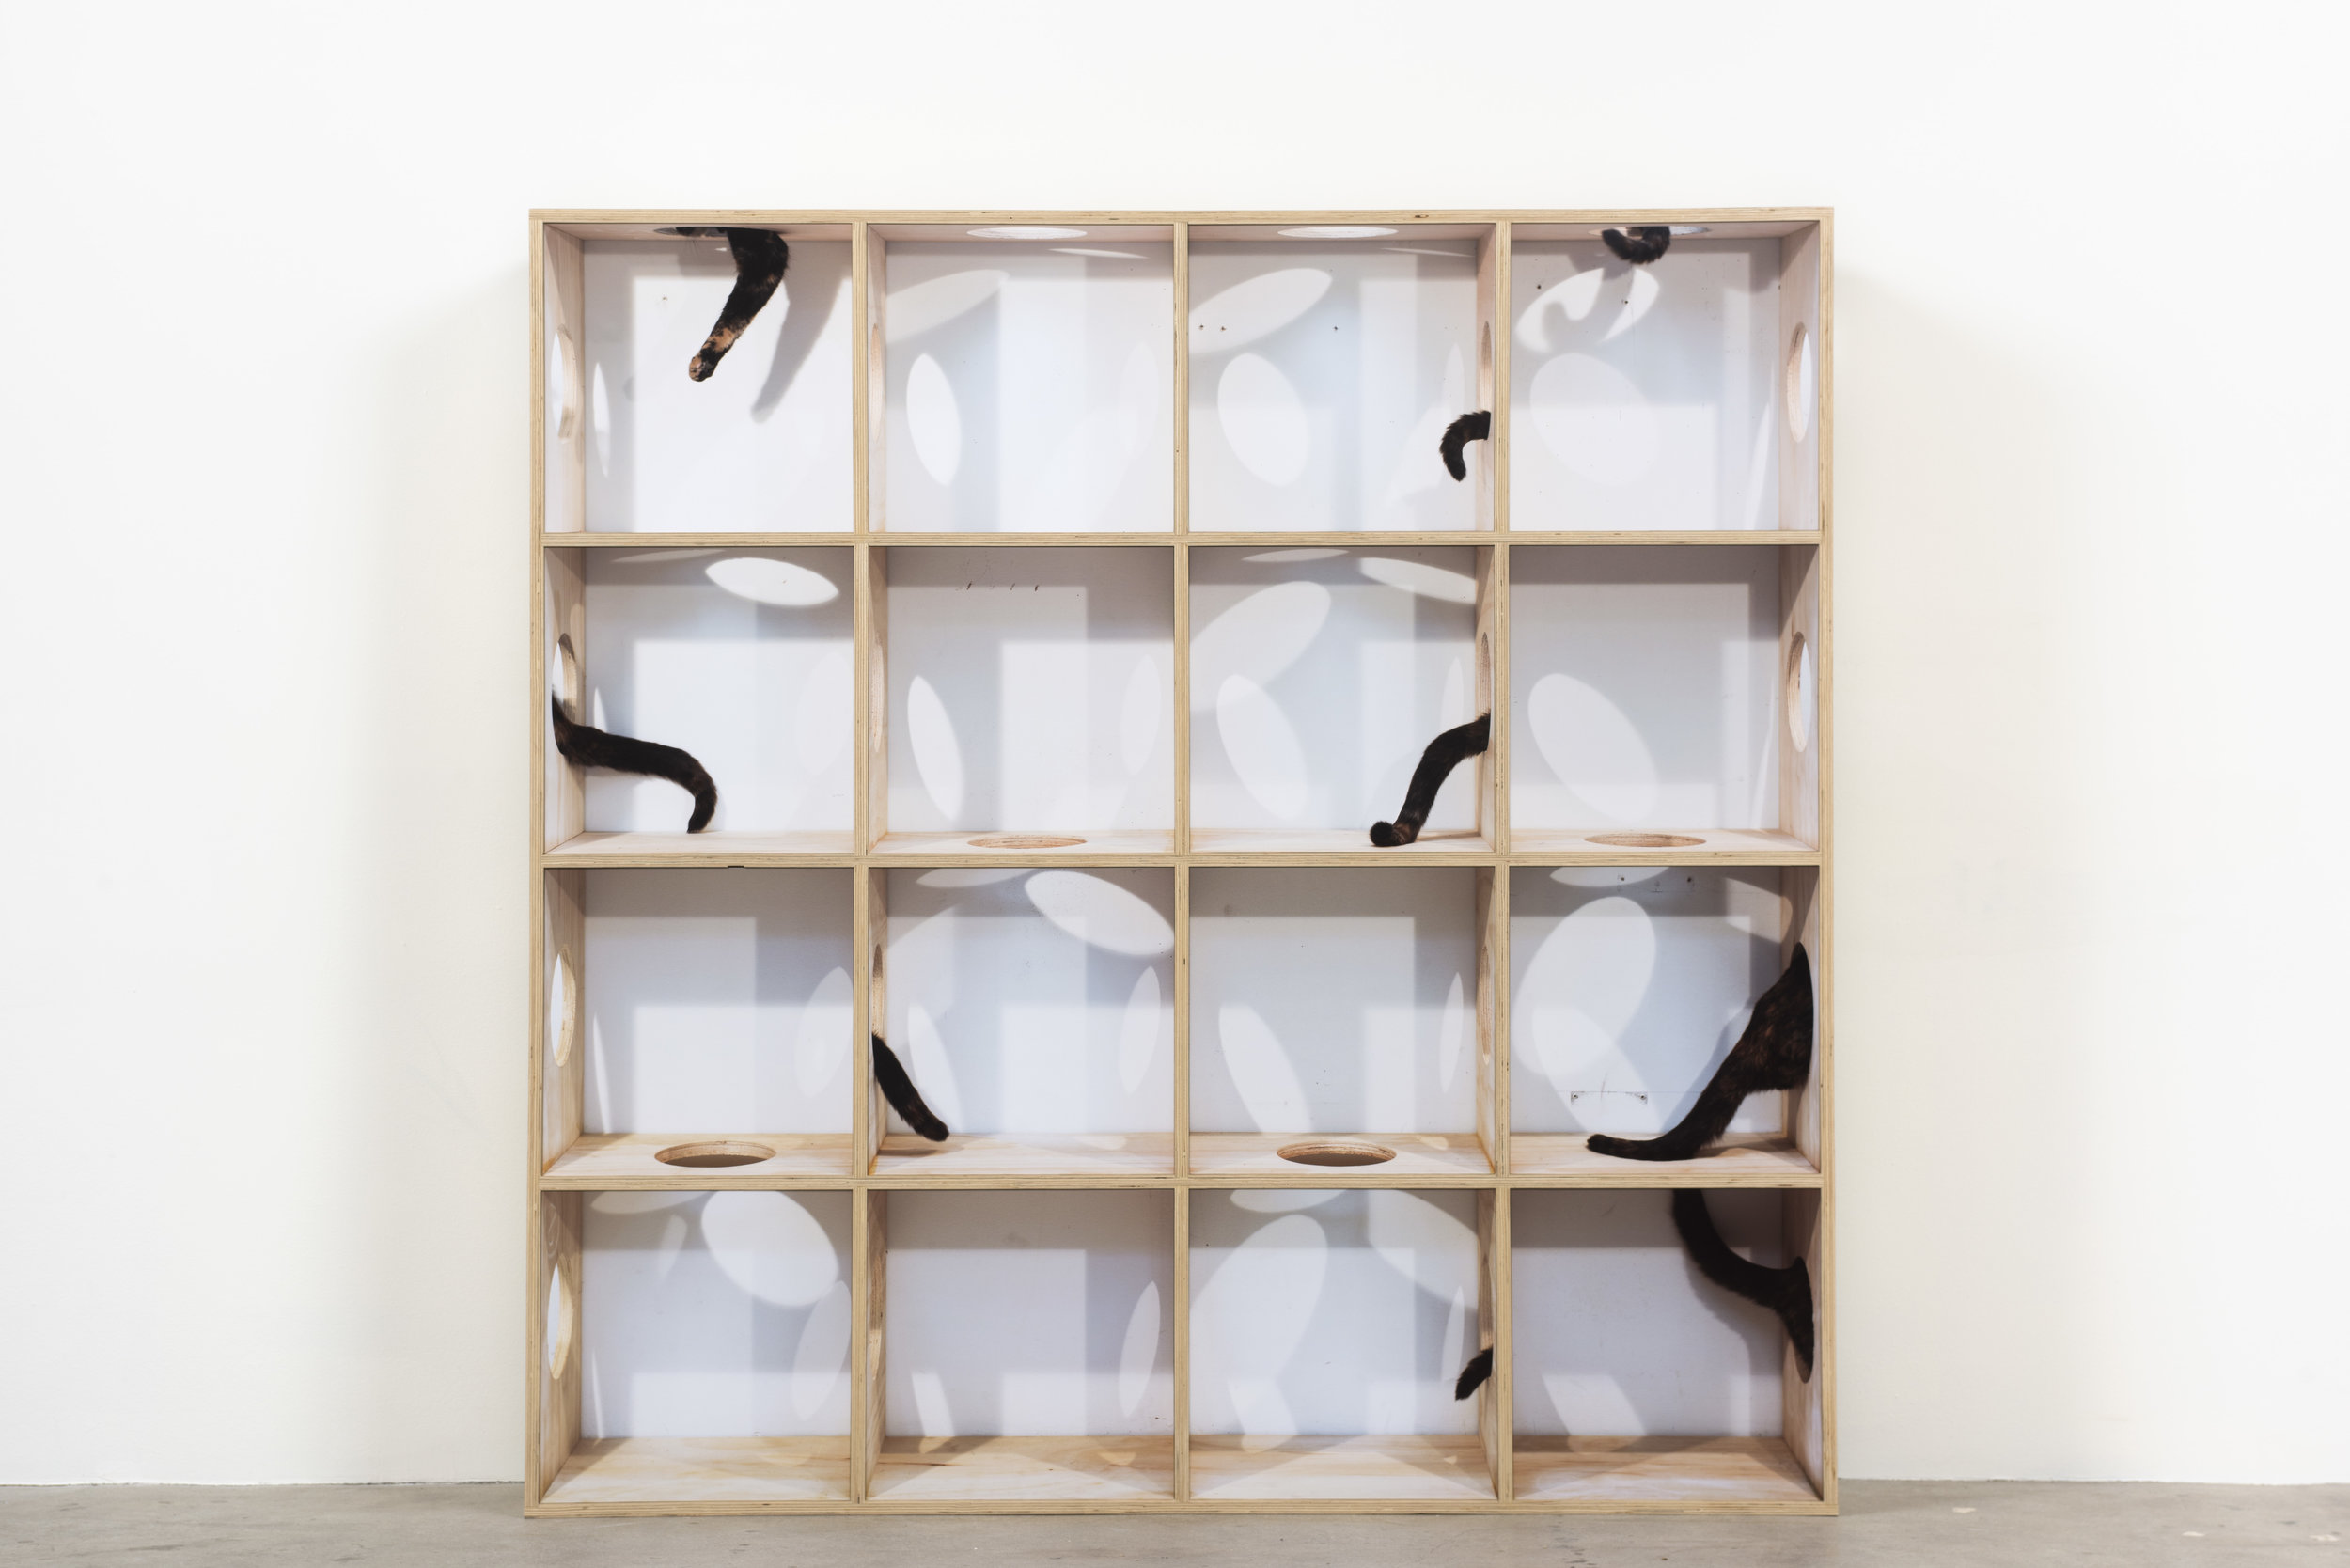   Disappearing Act , 2019  Archival pigment prints and wood  64 x 64 x 10 inches      